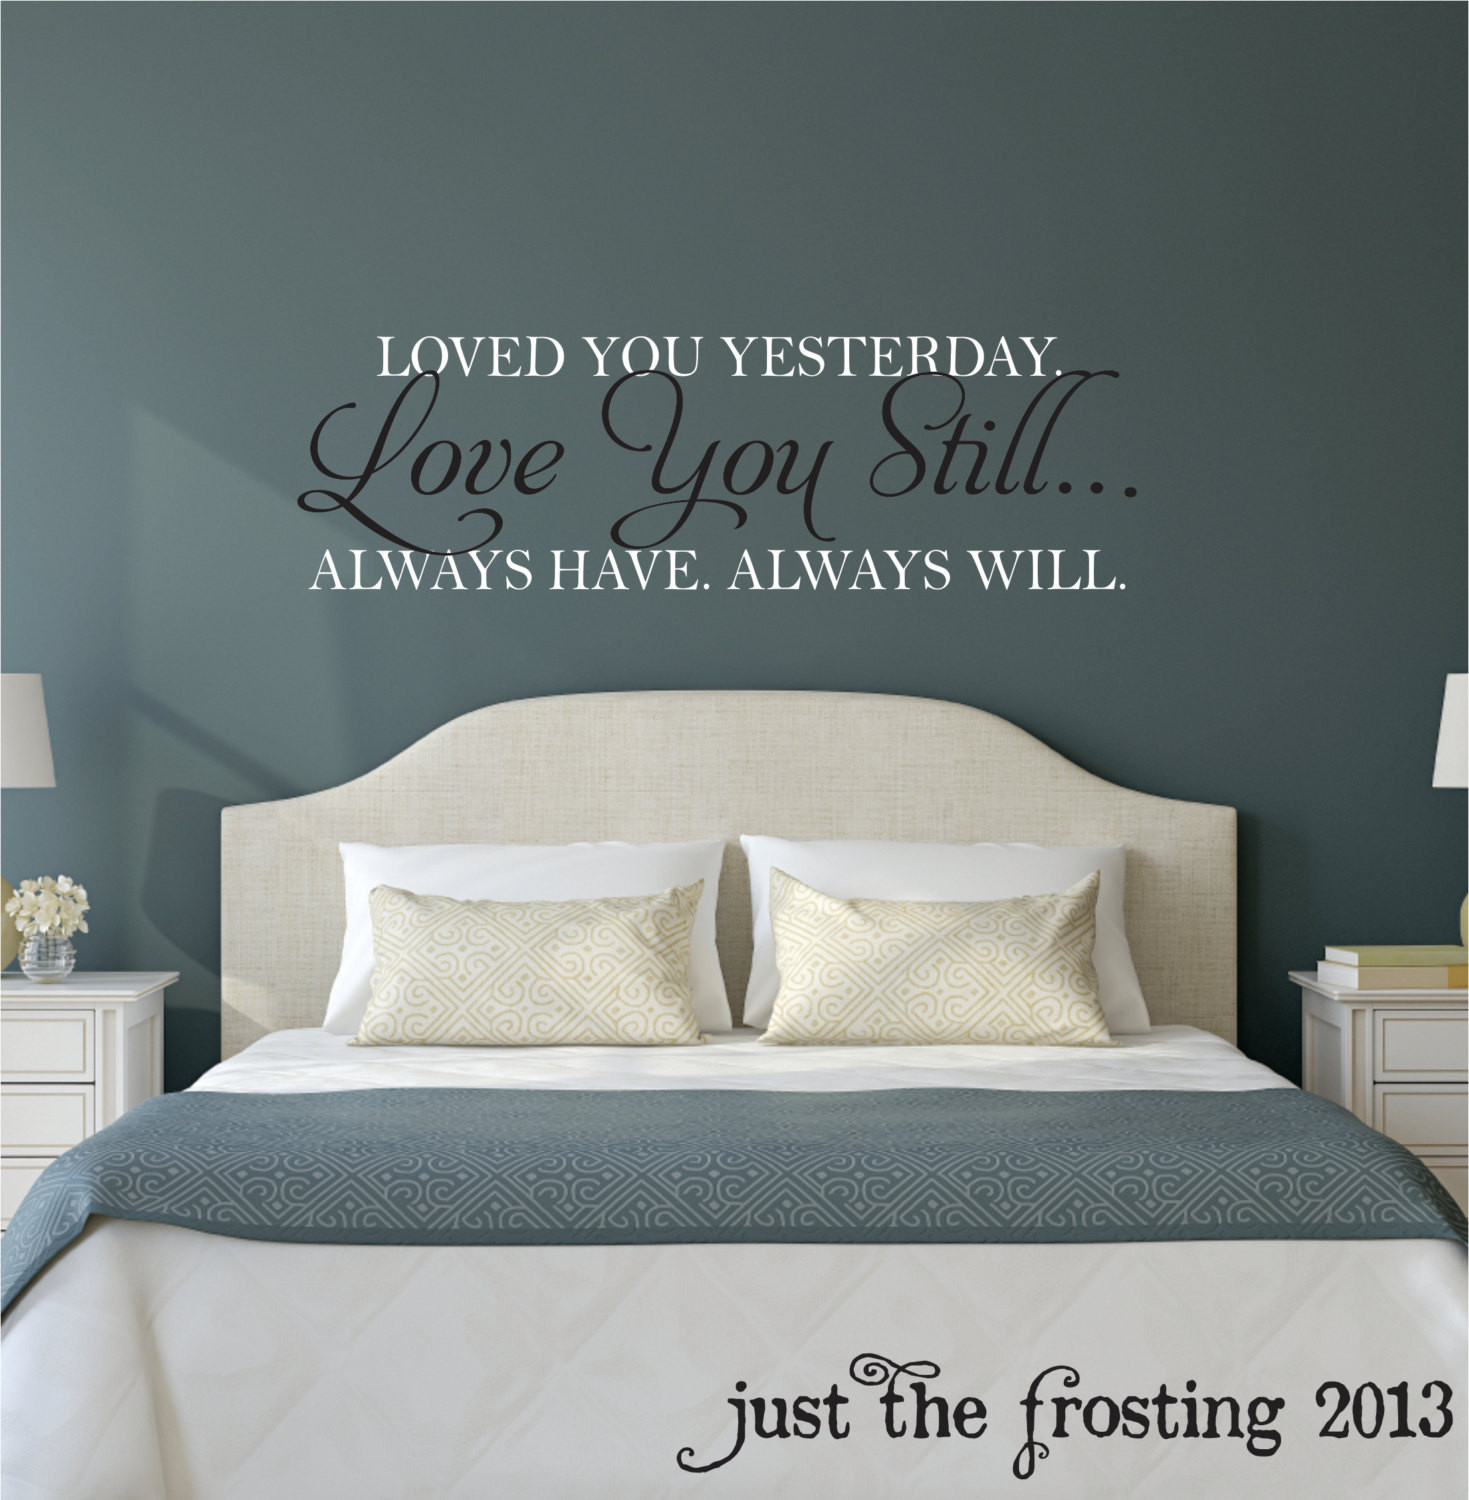 Master Bedroom Wall Decals
 Love You Still Master Bedroom Wall Decal Vinyl Wall Quote